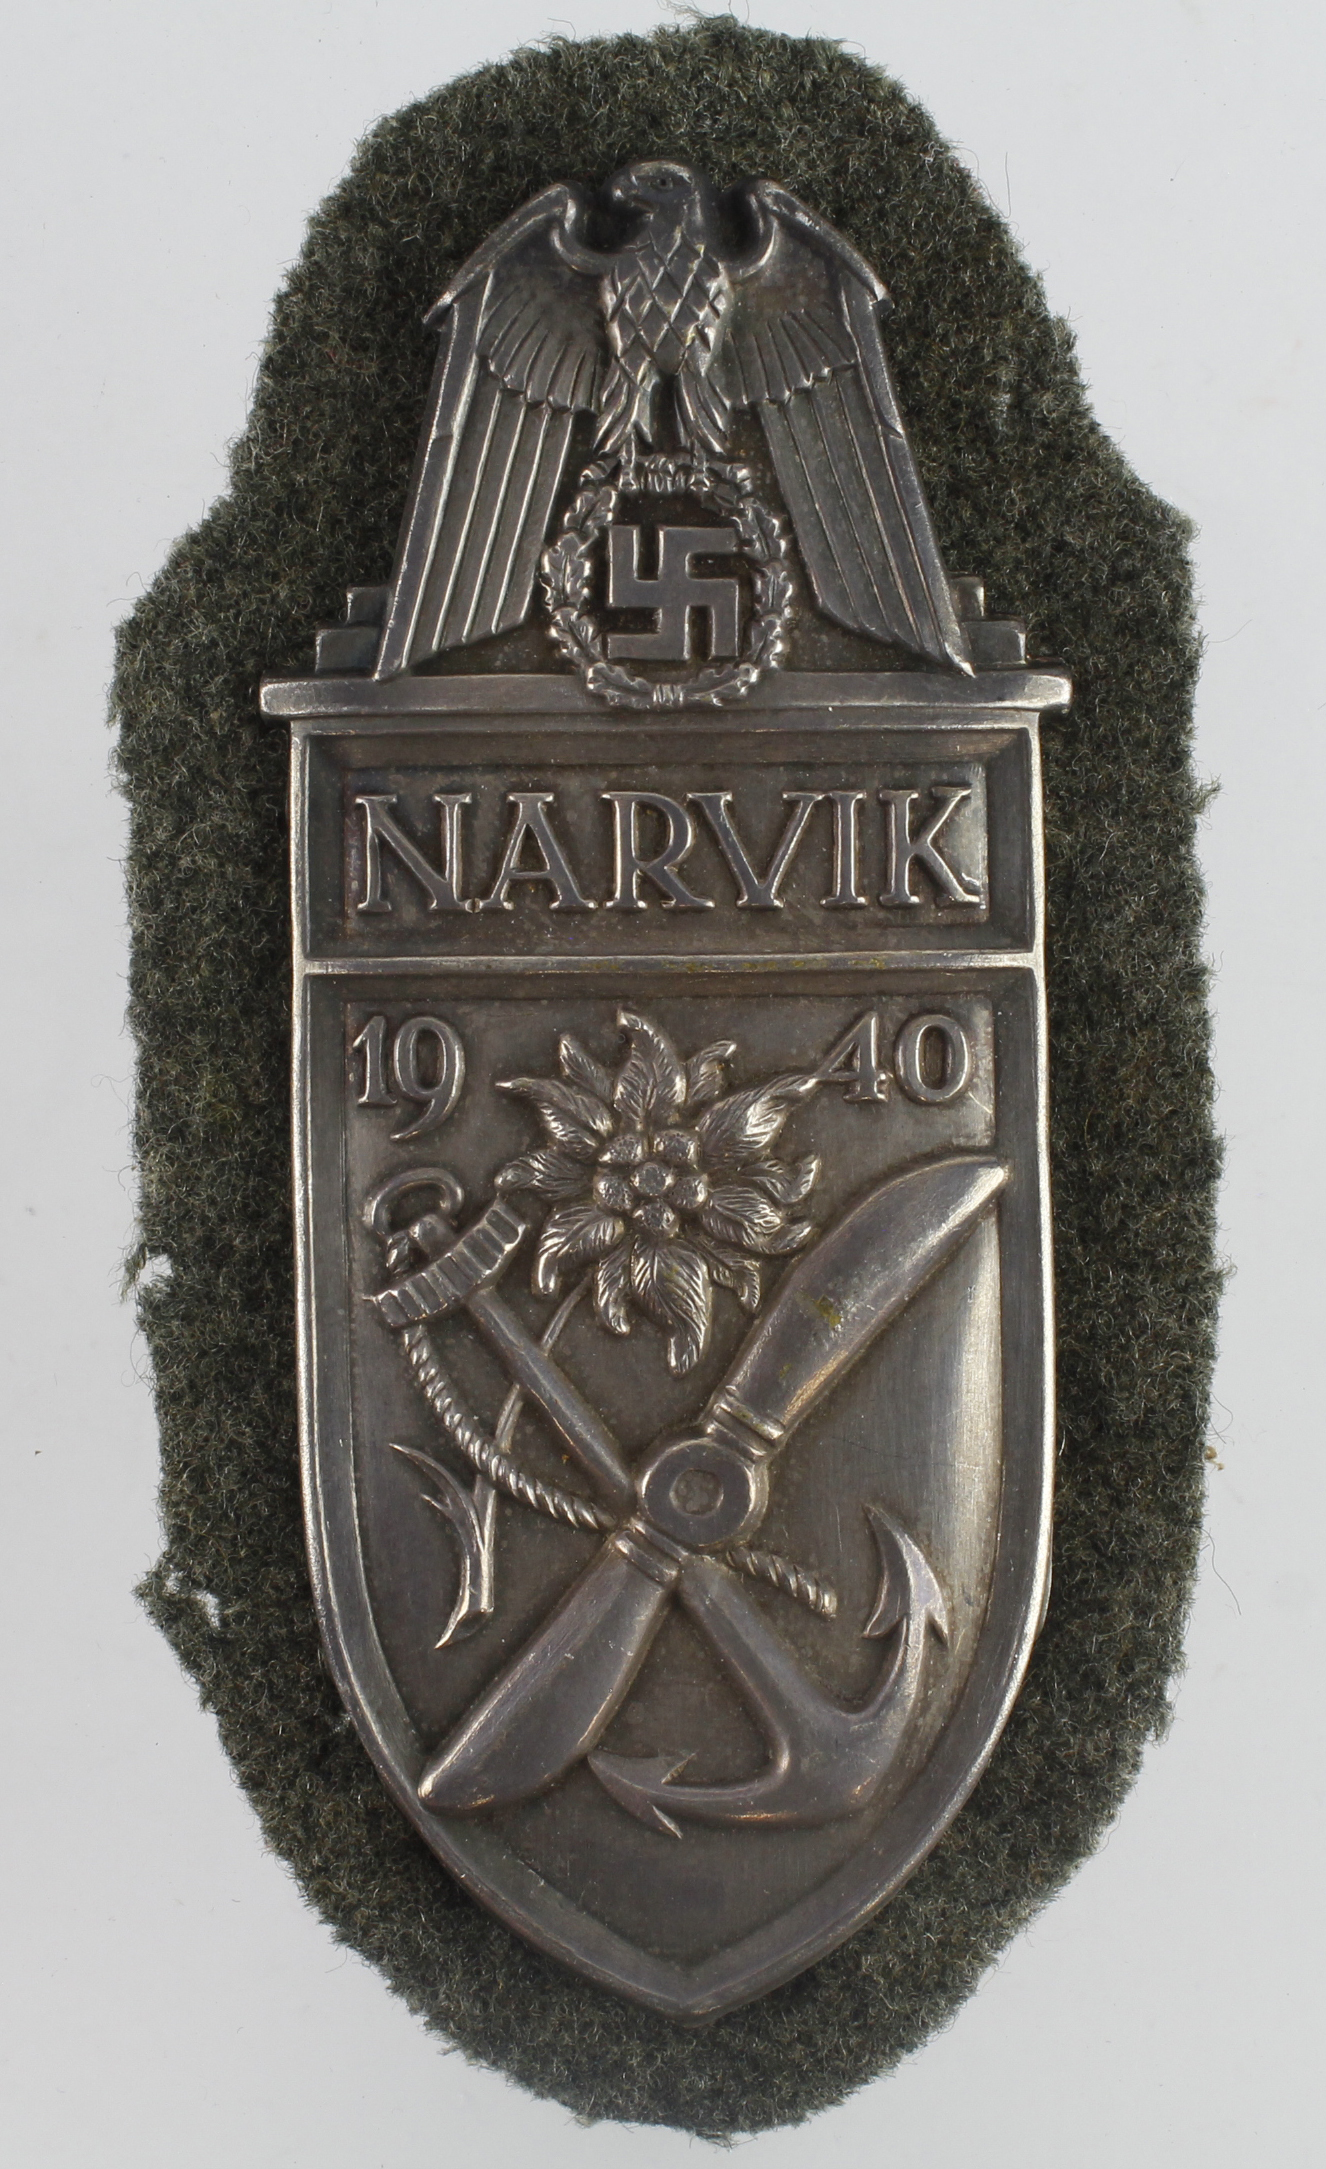 German Narvik 1940 arm shield with grey green backing